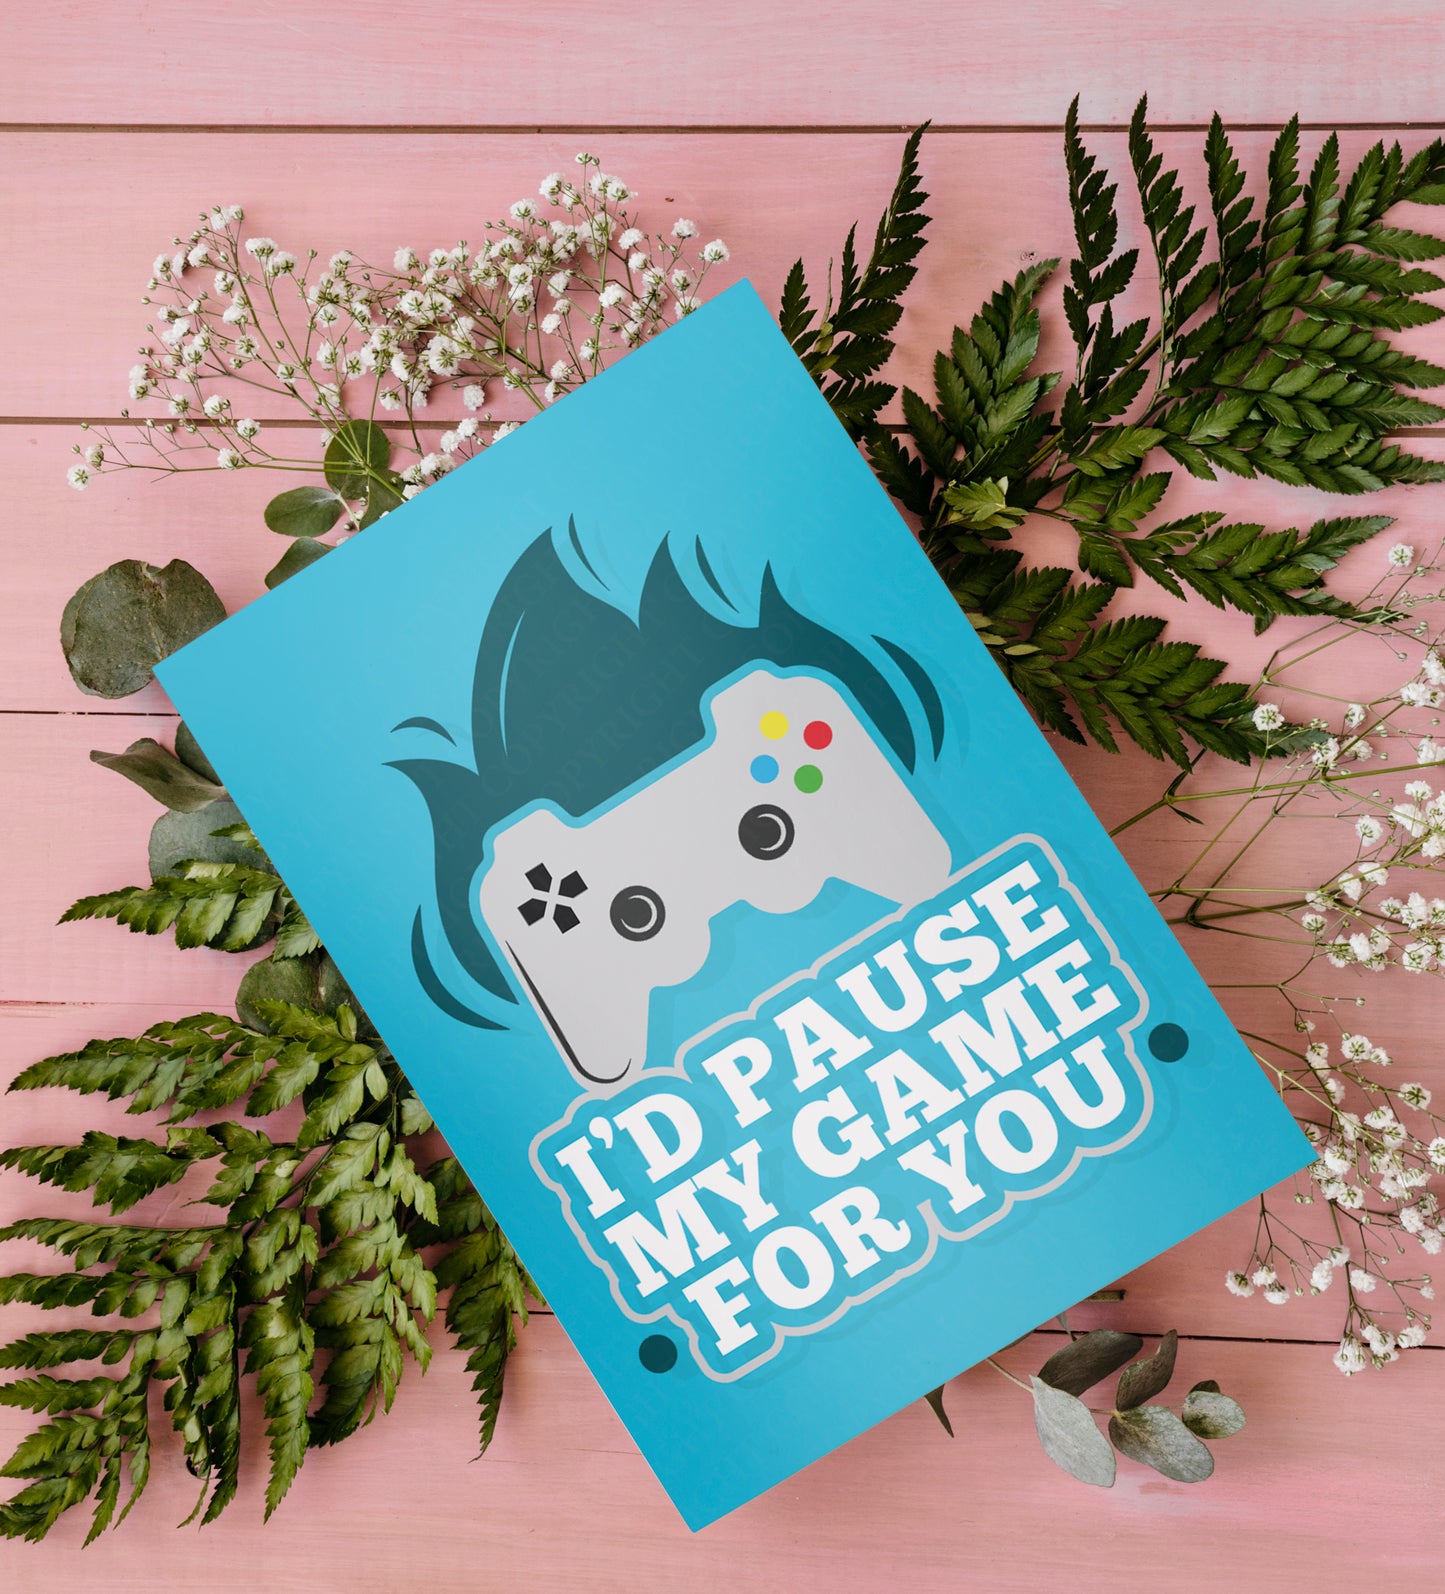 I'd pause my game for you | Instant Digital Download JPG